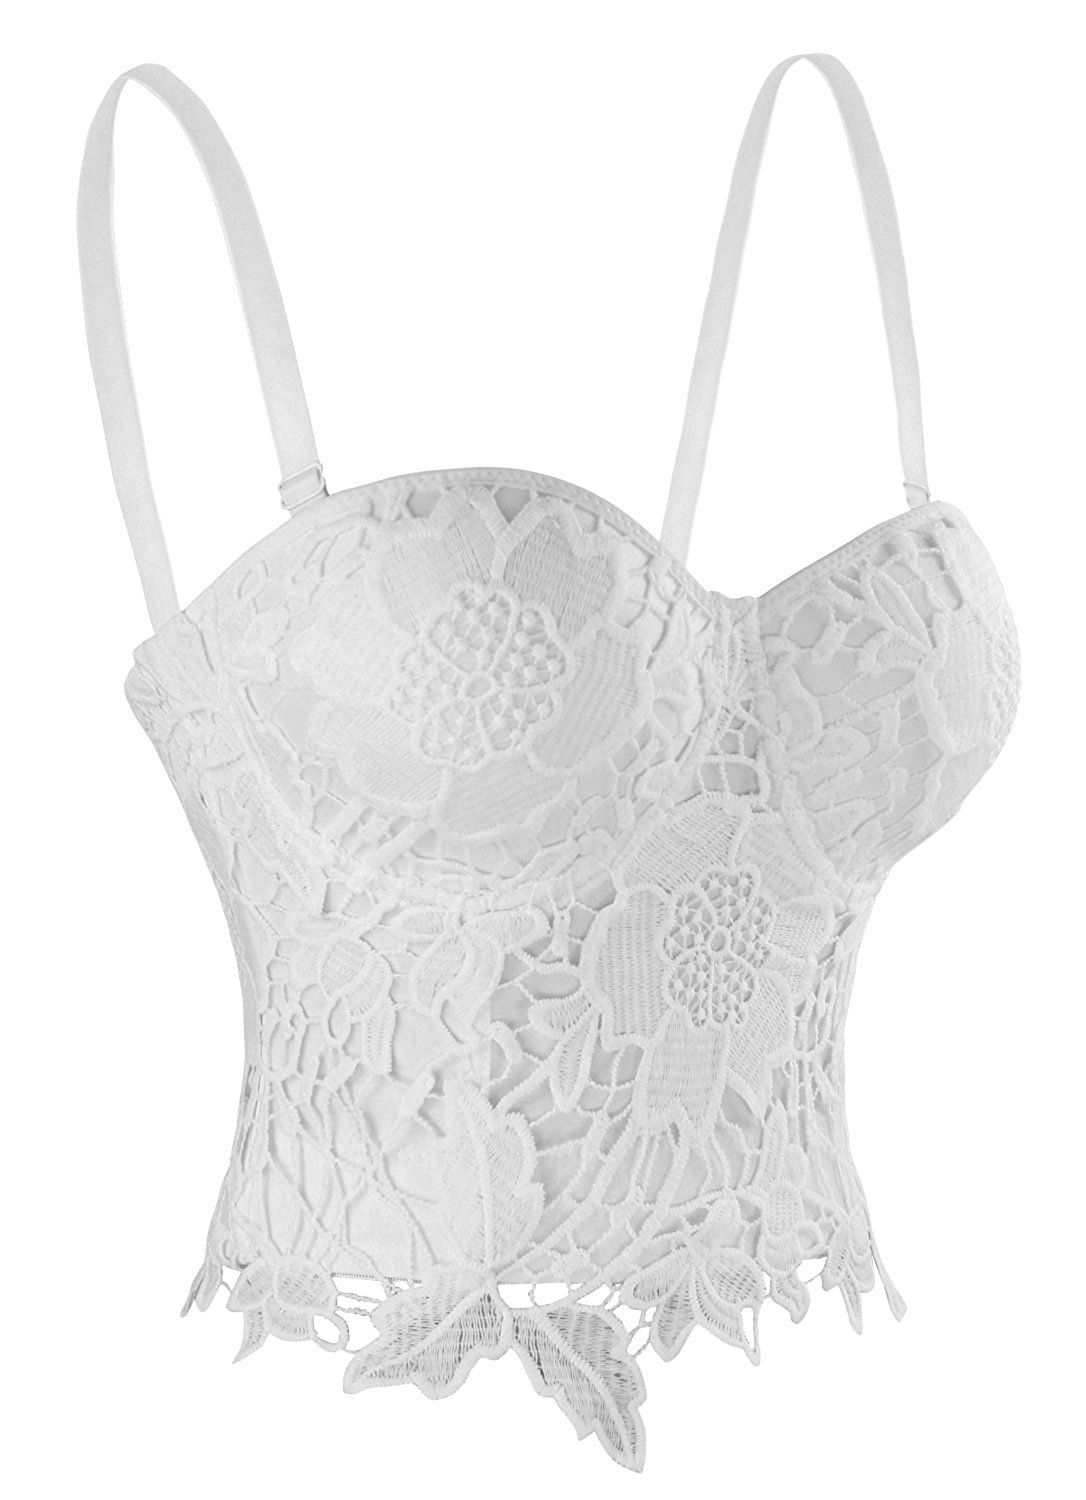 Goth Floral Lace Bustier White